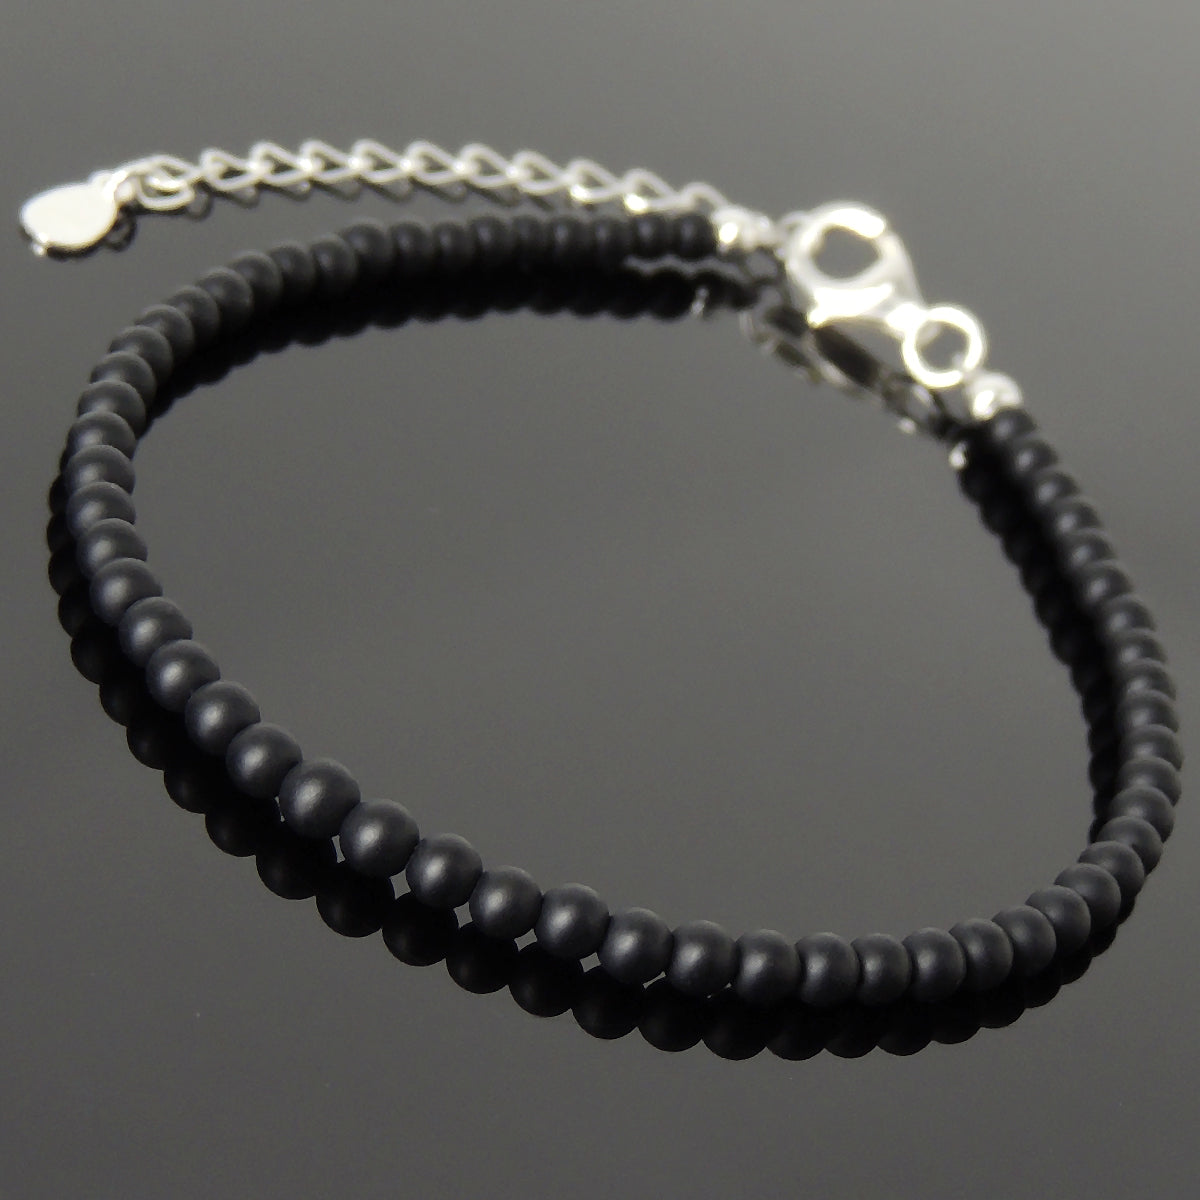 3mm Matte Black Onyx Healing Gemstone Bracelet with S925 Sterling Silver Chain & Clasp - Handmade by Gem & Silver BR1259